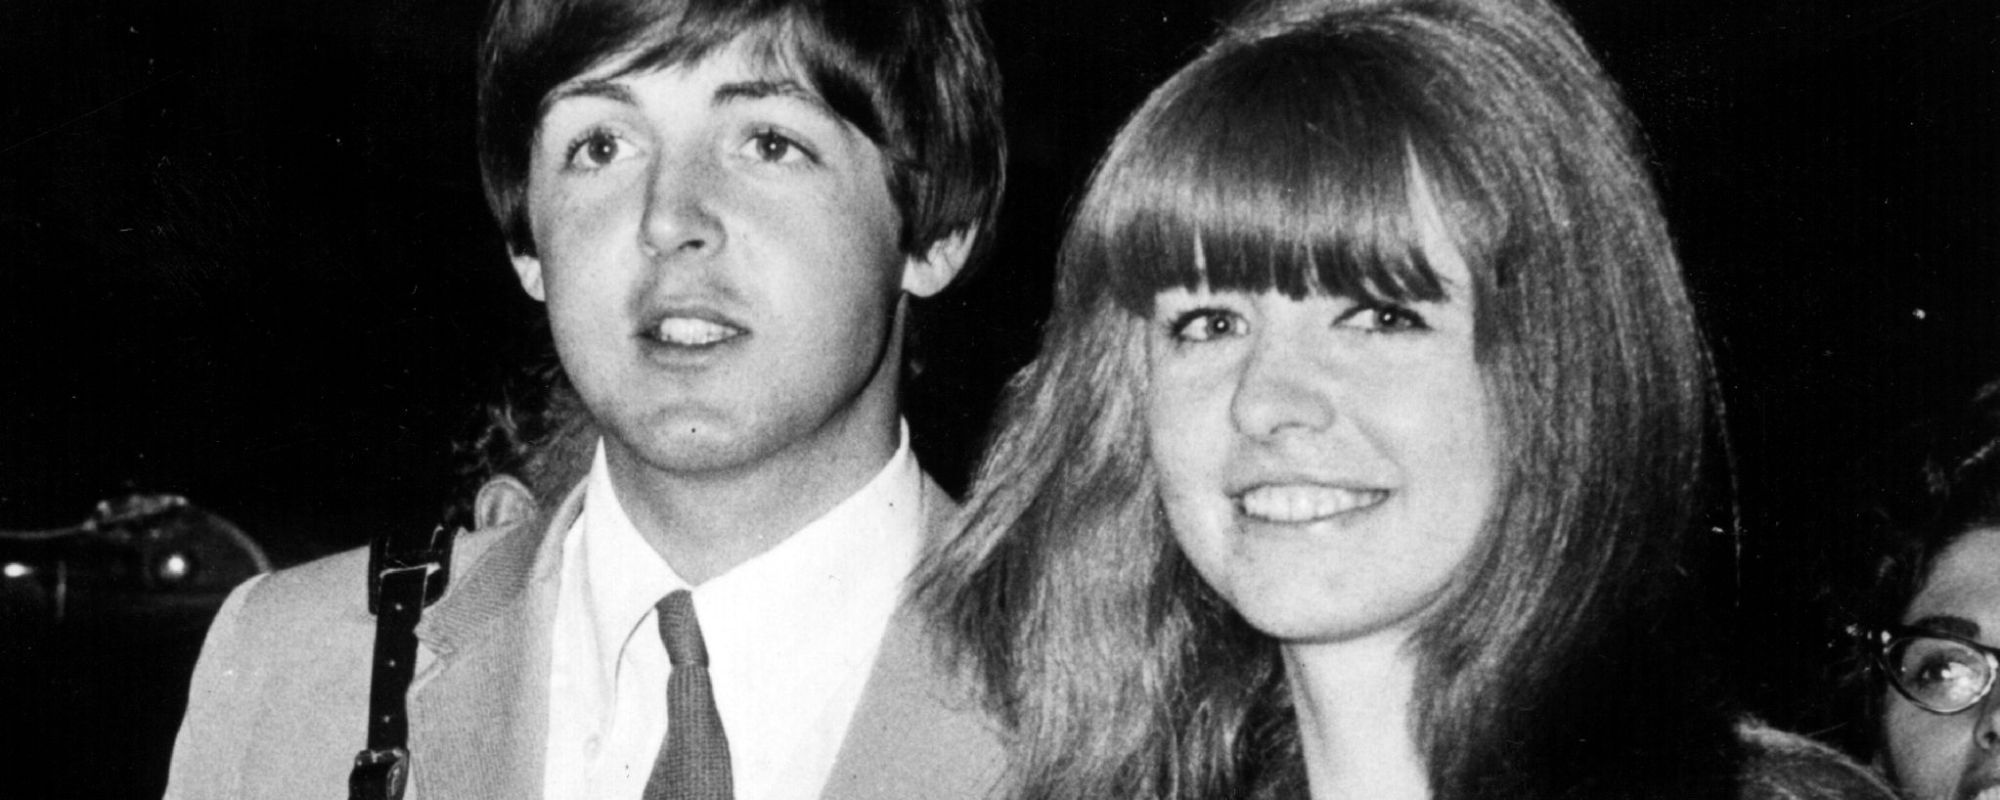 Paul McCartney and Jane Asher smiling side by side